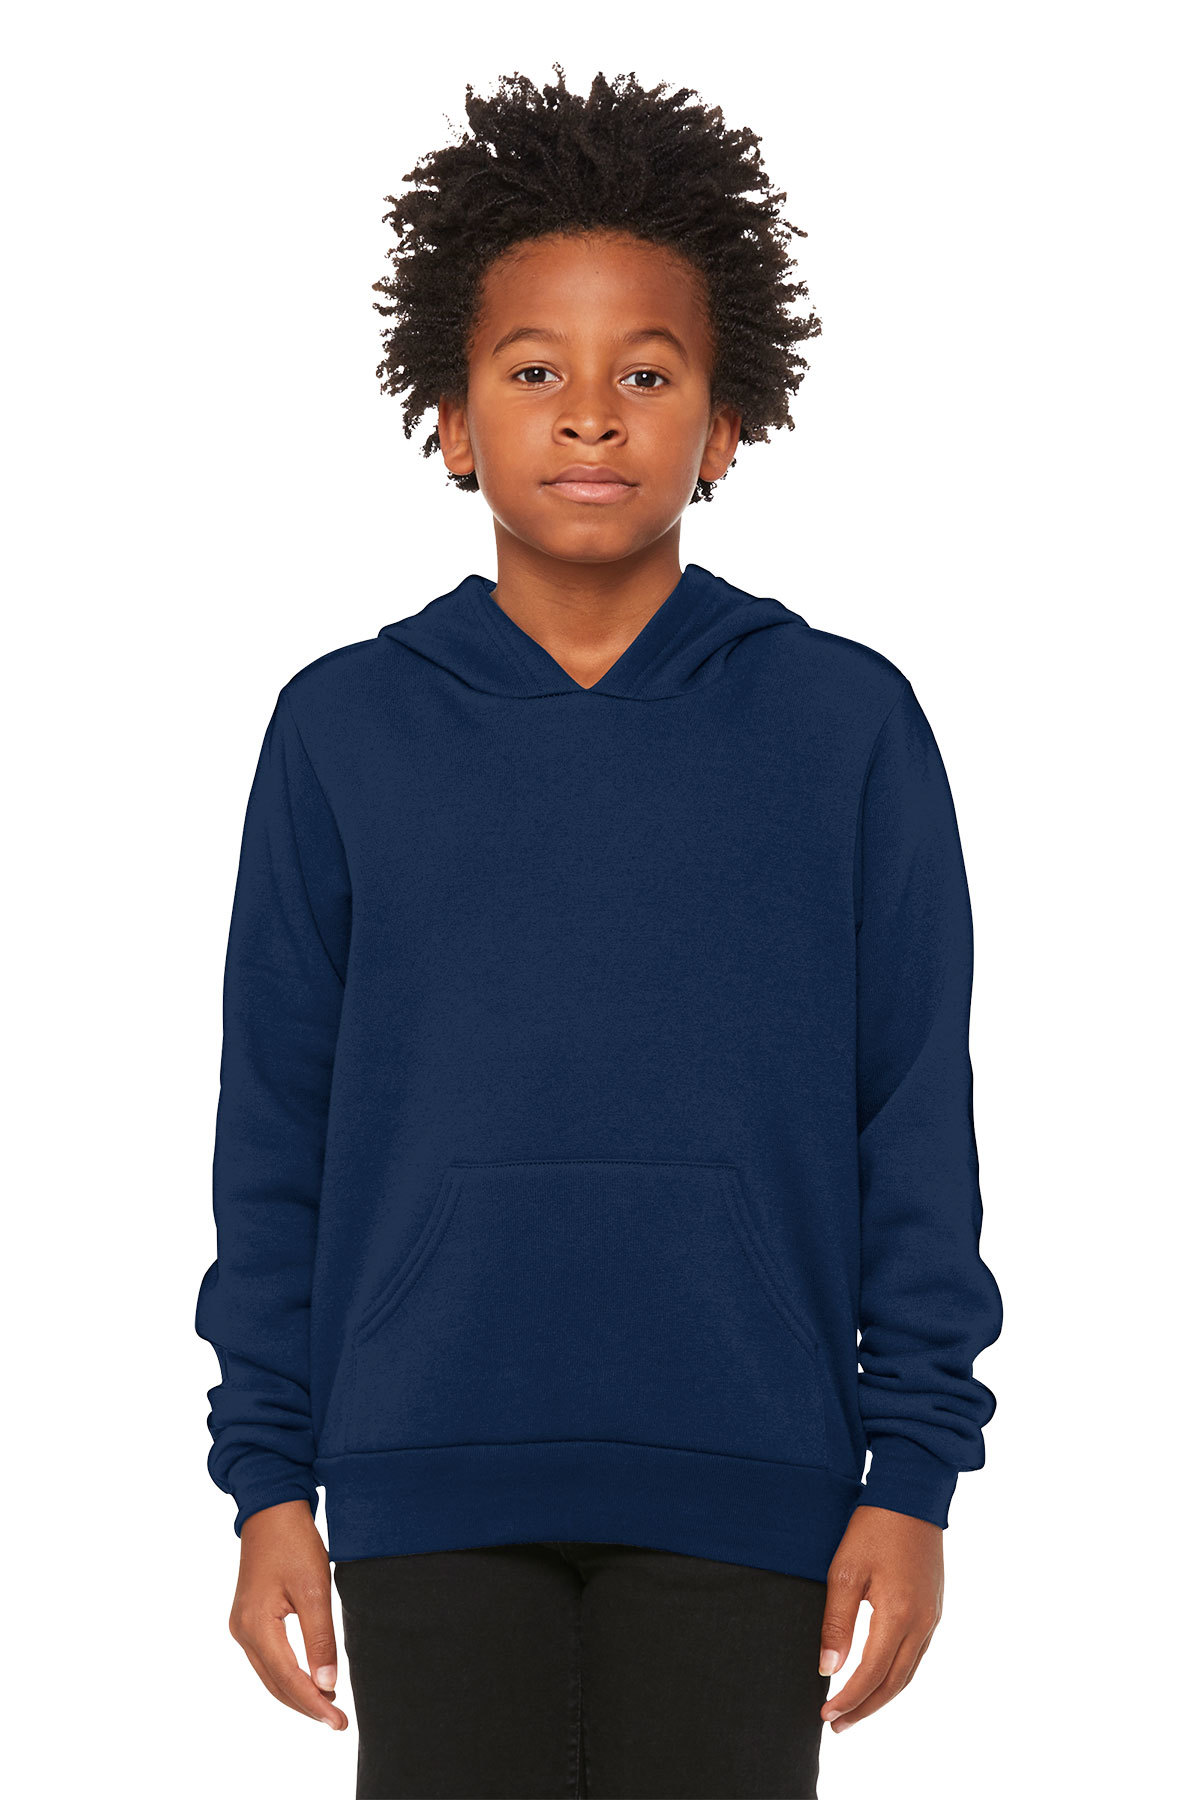 BELLA+CANVAS Youth Sponge Fleece Pullover Hoodie | Product | Company ...